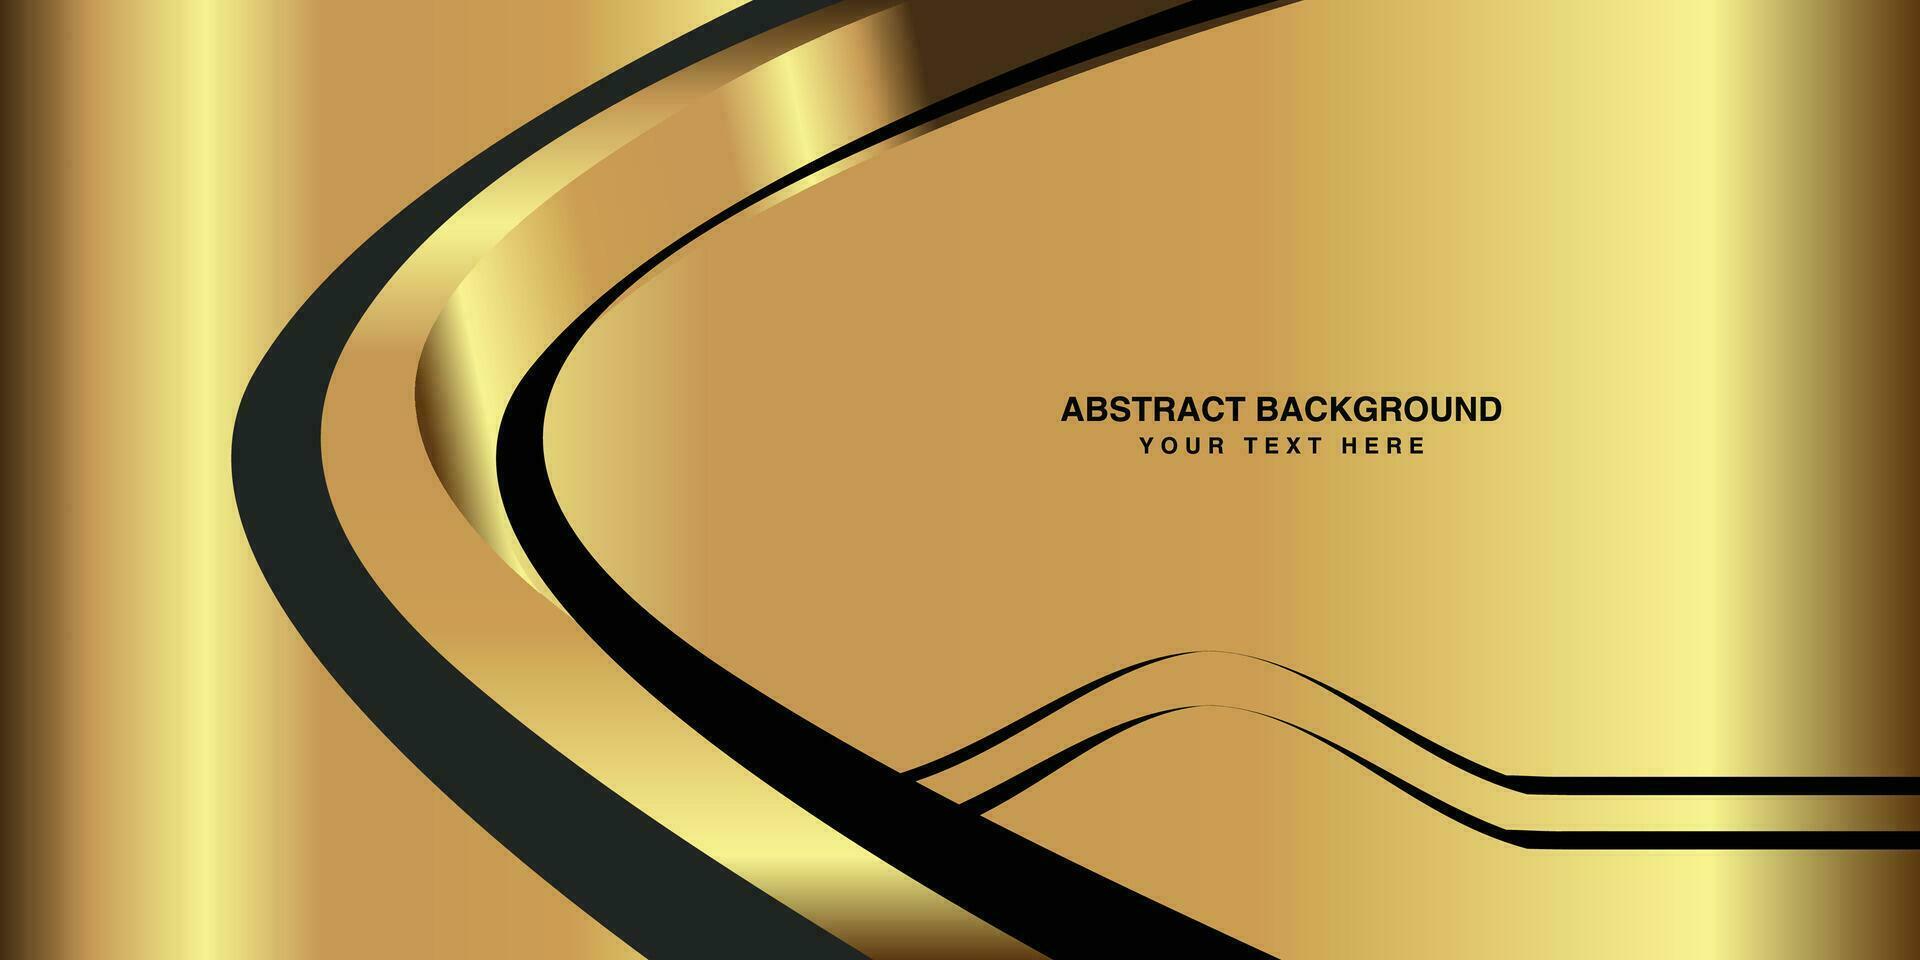 luxurious Abstract Background design illustration, Black and Golden Background creative vector